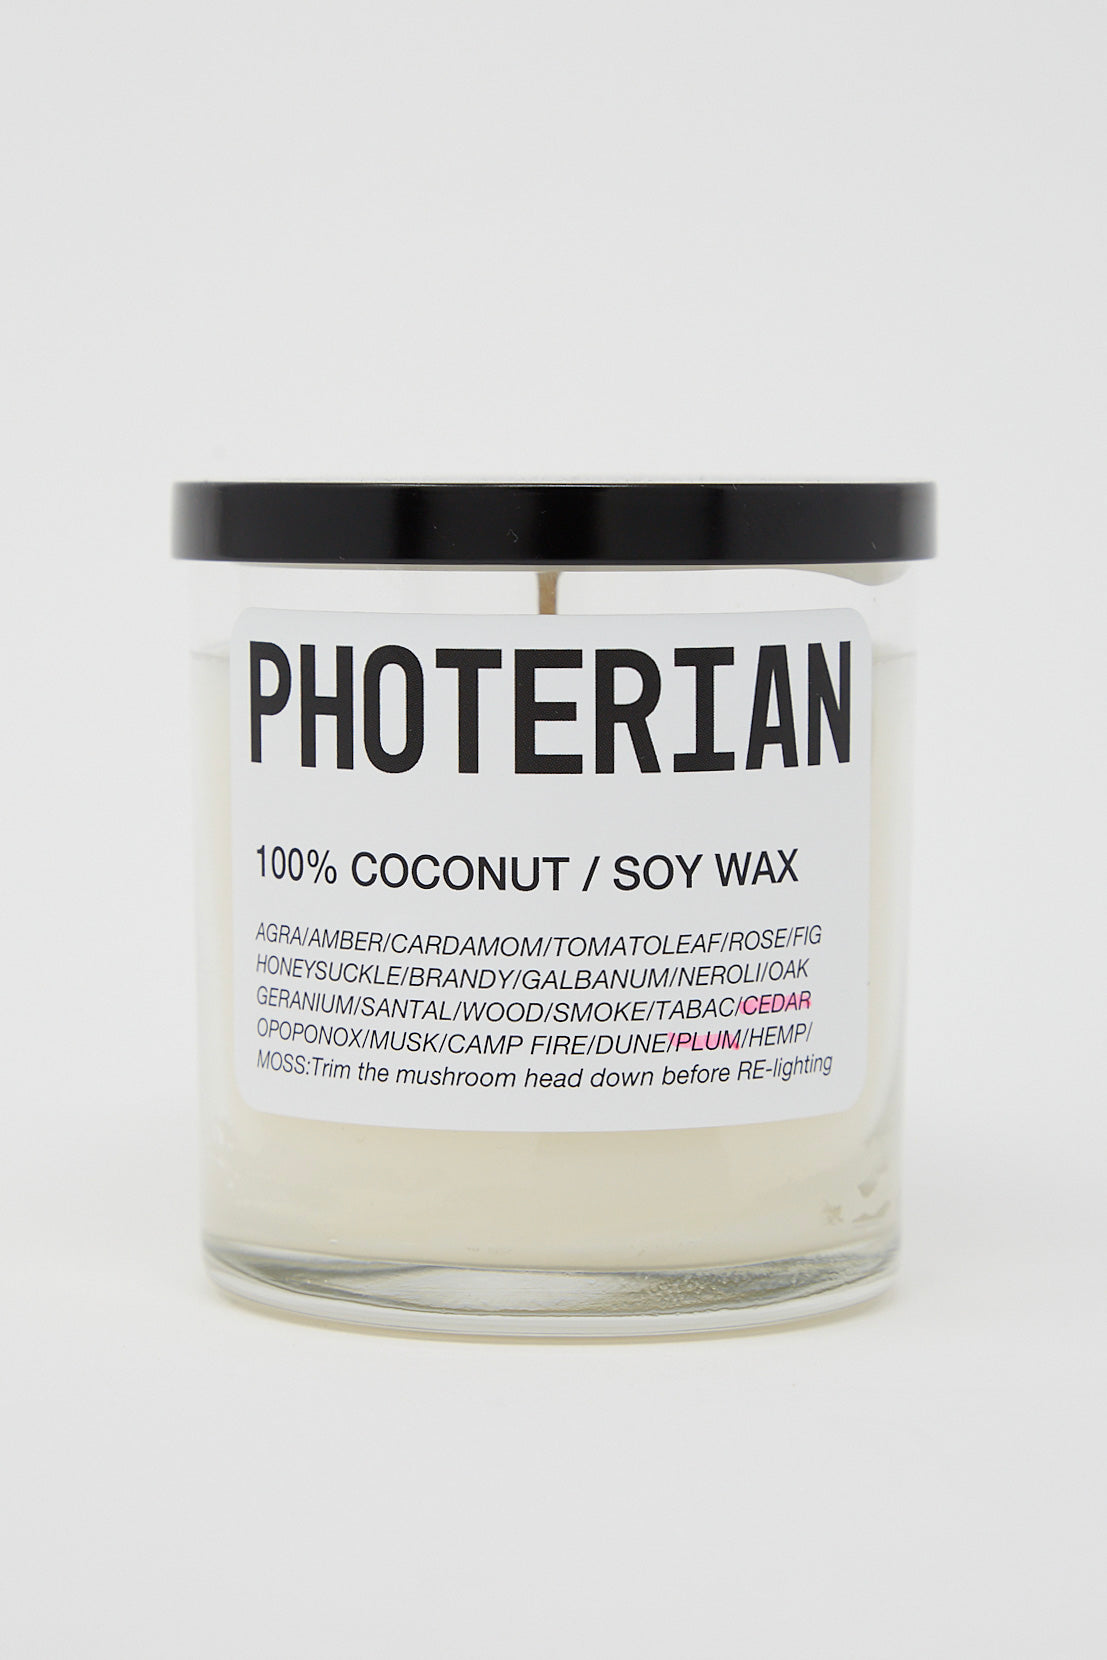 A Votive Coconut Soy Candle in Plum Cedar with the brand name Photerian, made from a coconut and soy blend.